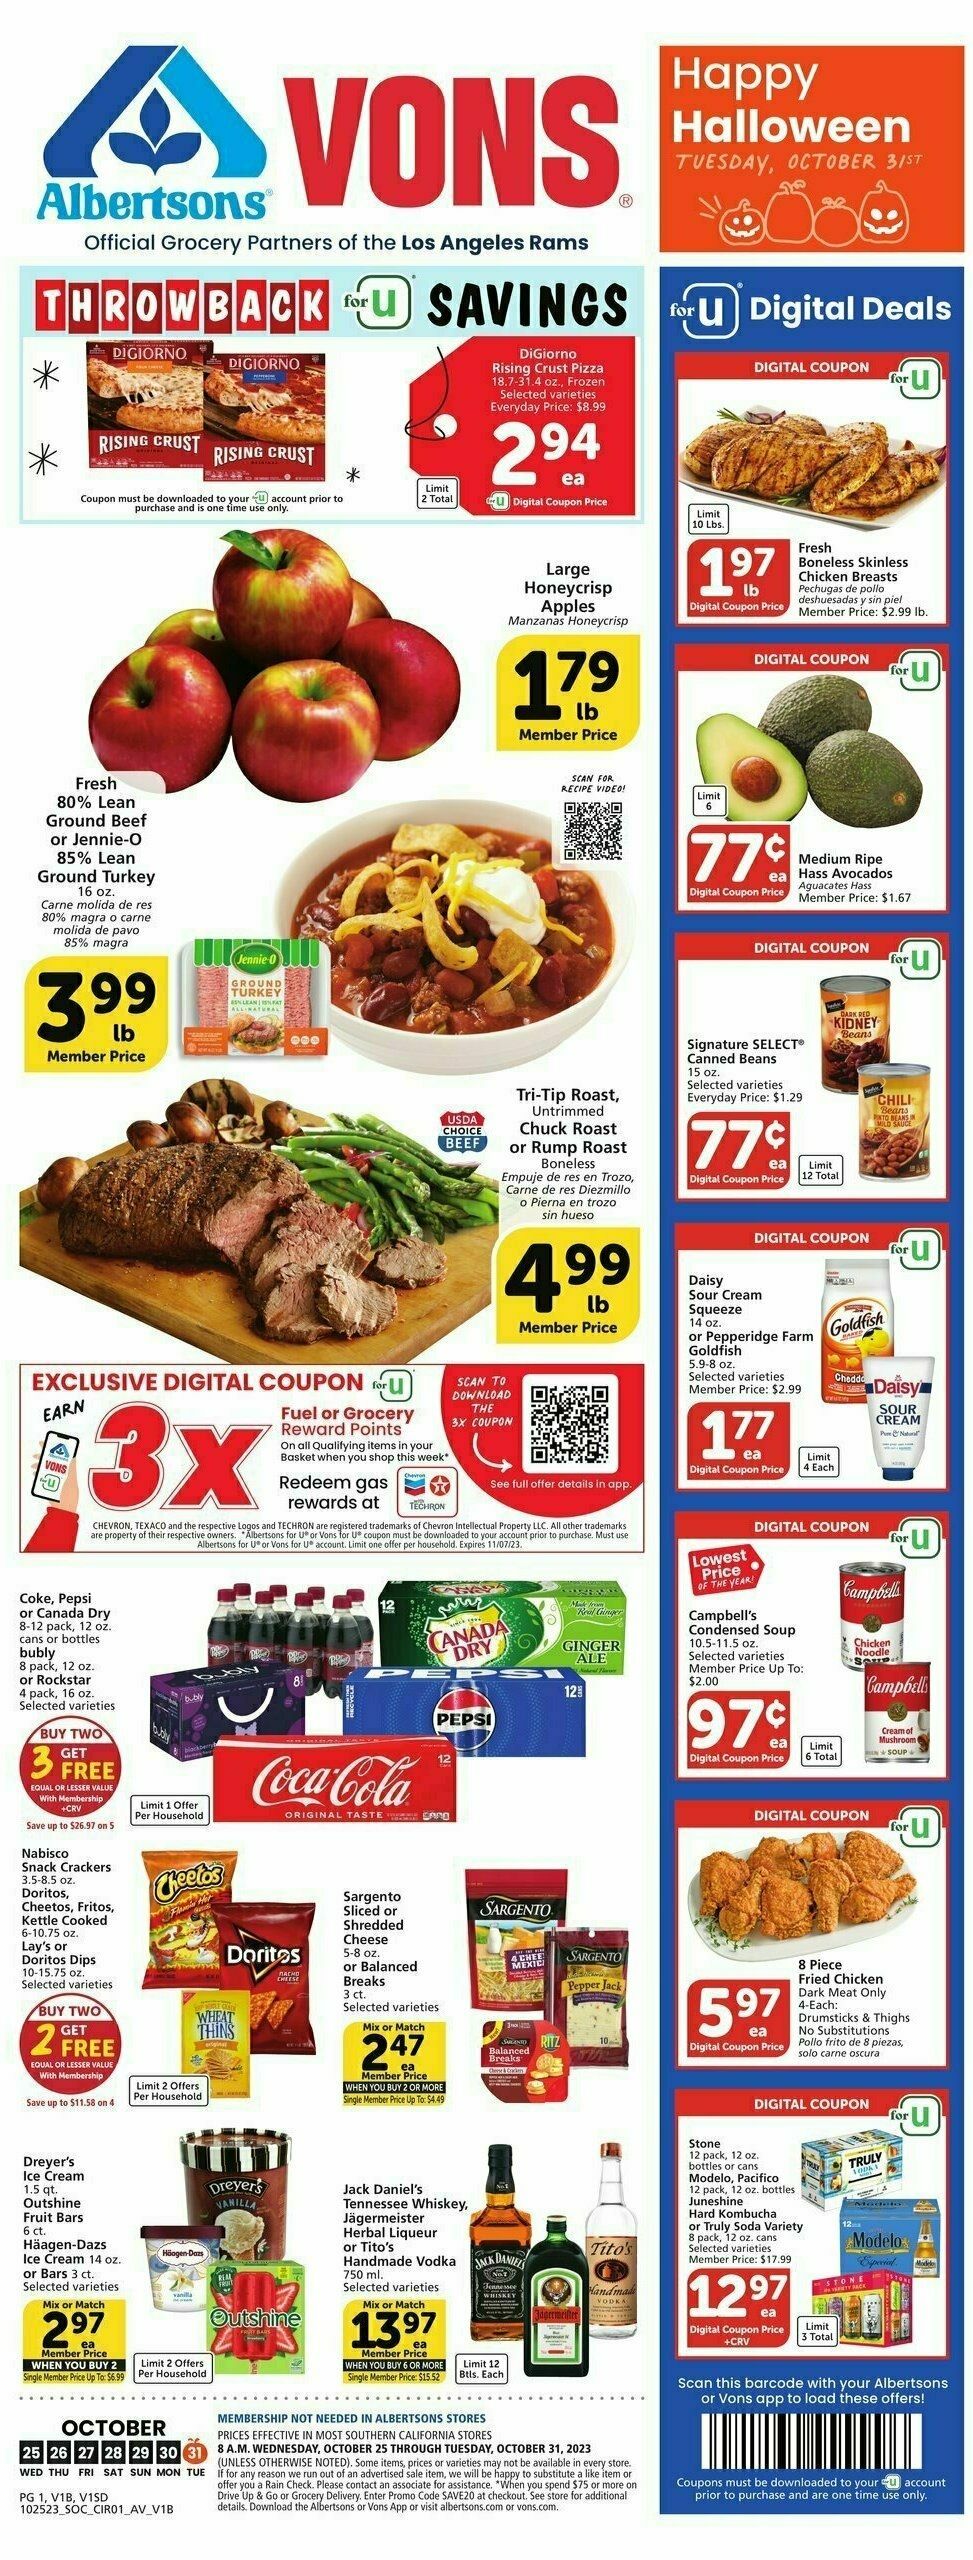 Vons Weekly Ad from October 25